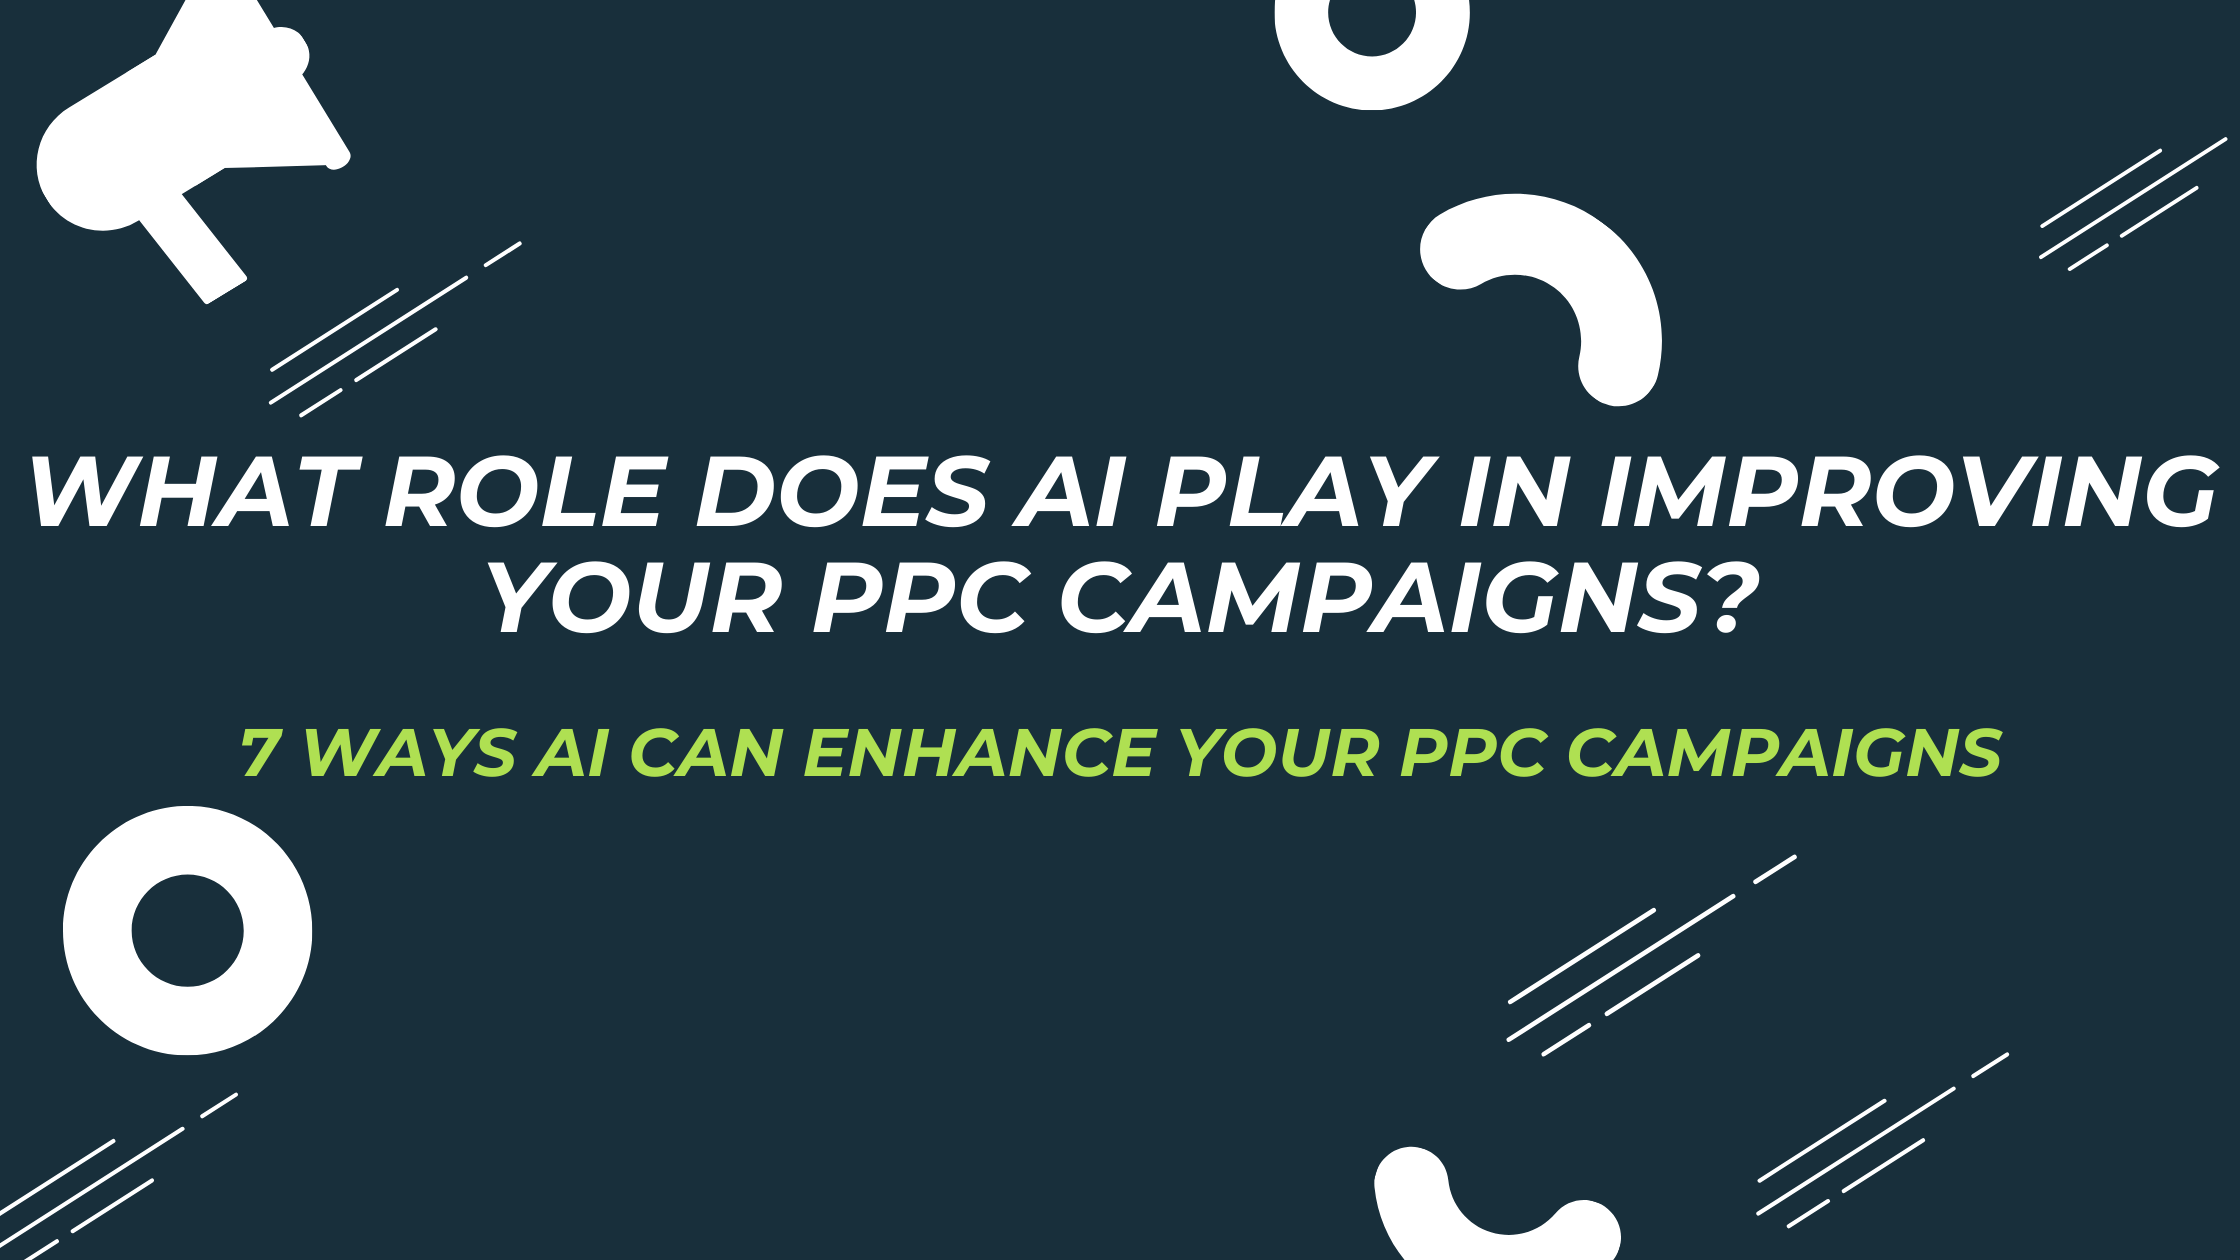 What role does AI play in improving your PPC campaigns?